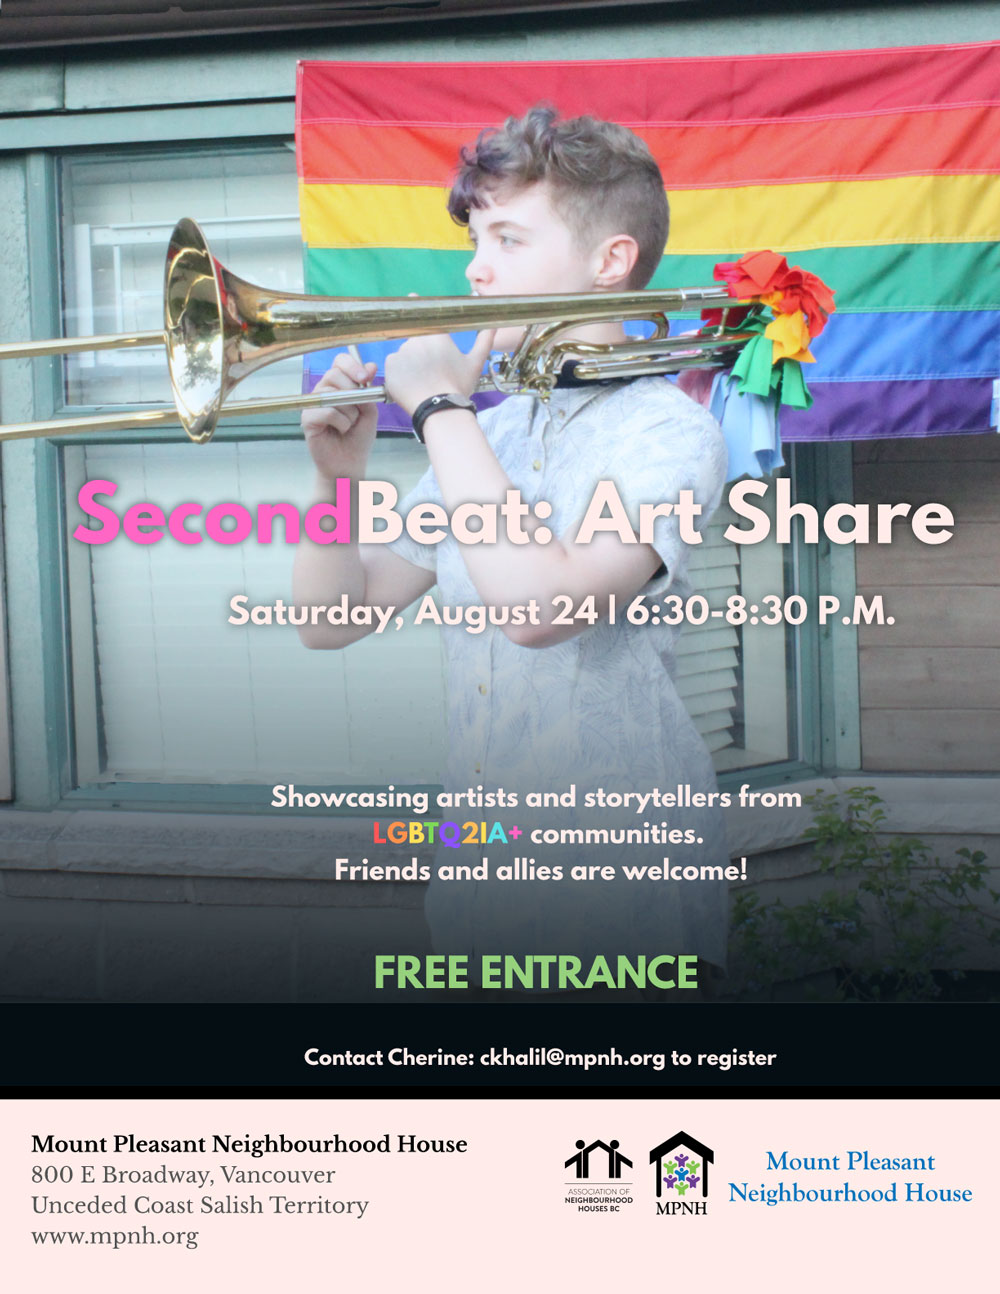 An image of the poster with event details, featuring a young person playing the trombone outdoors, in front of a Pride flag.